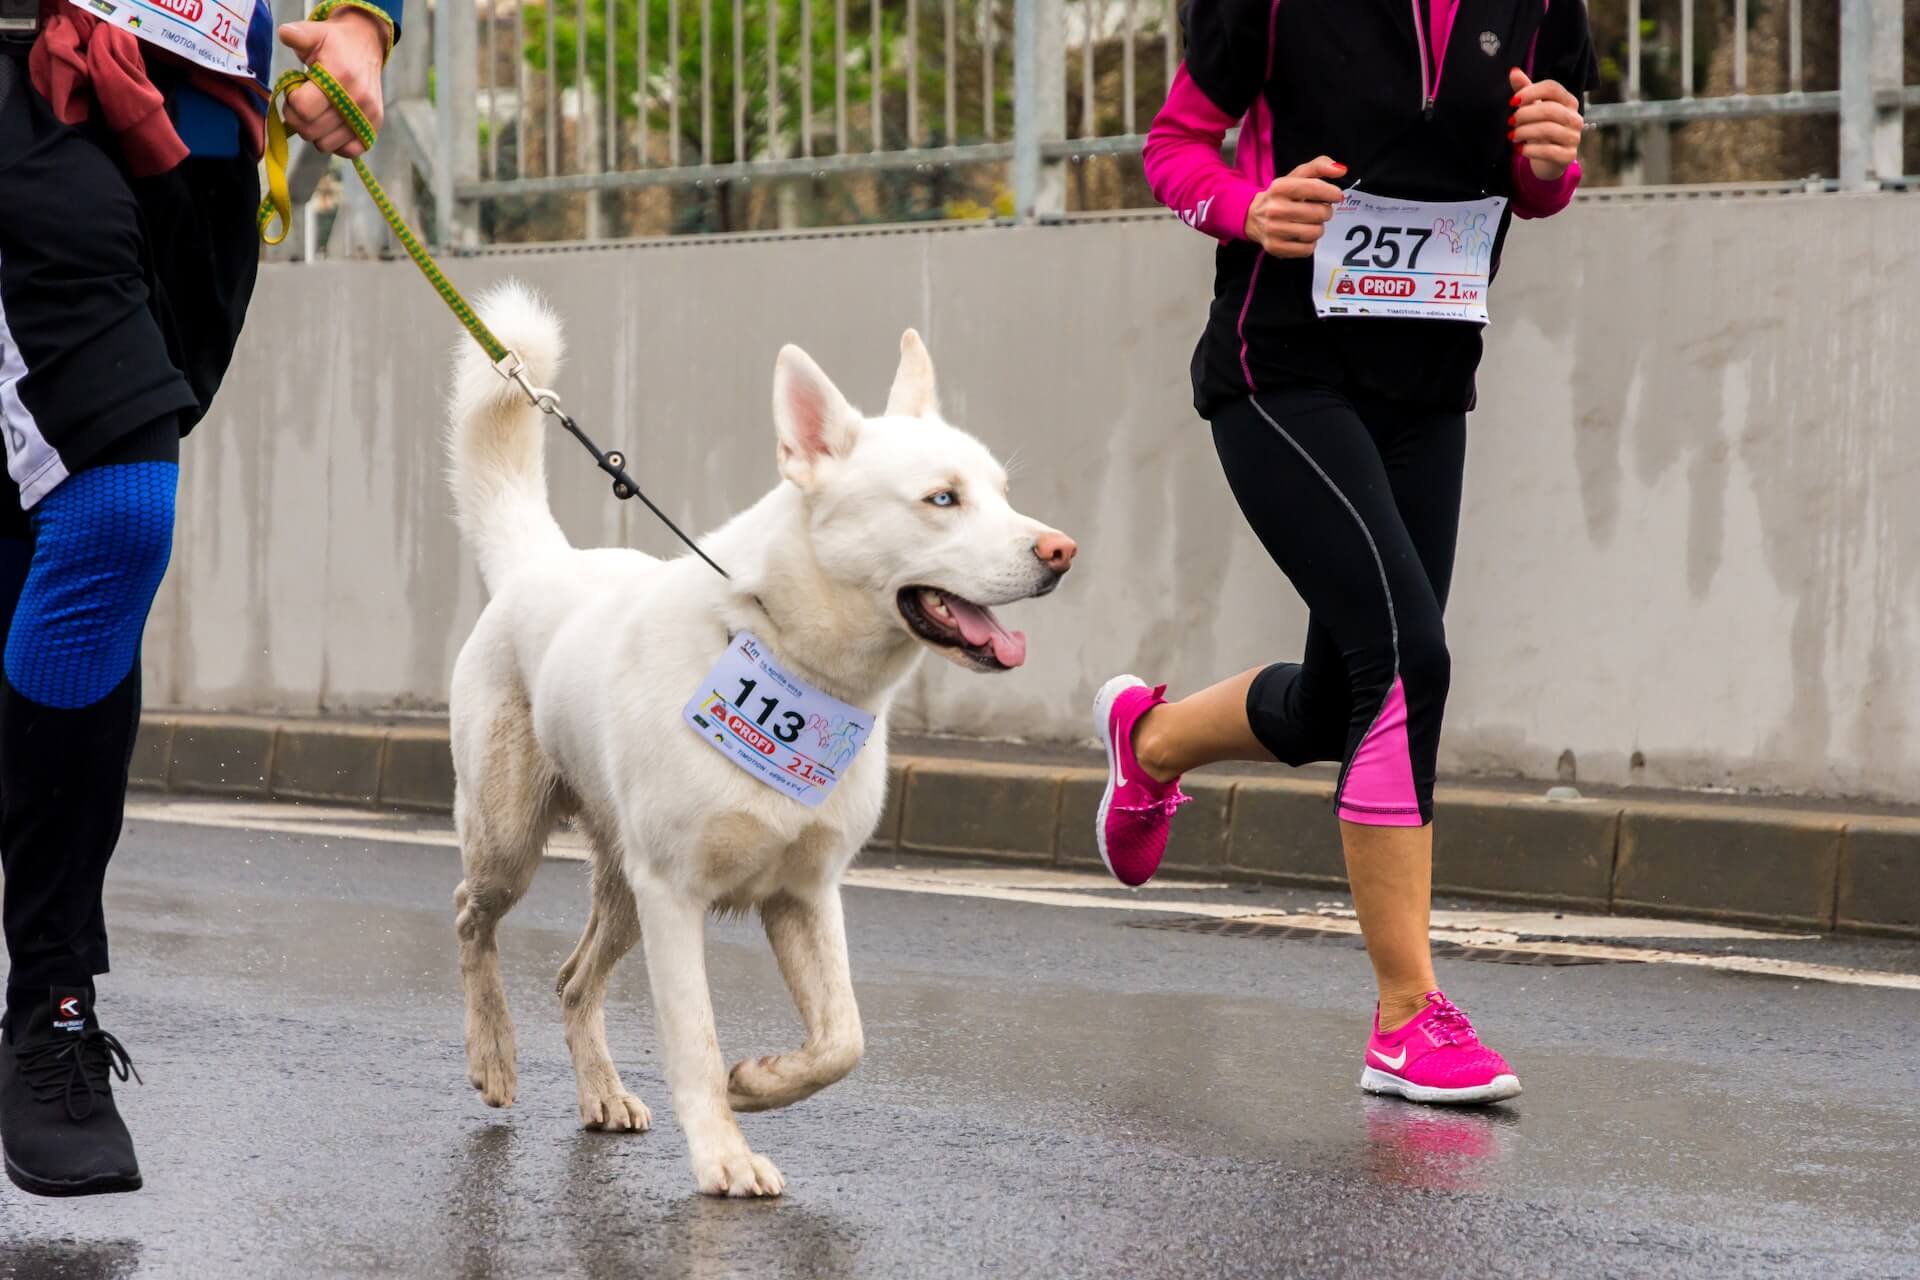 White dog on leash wearing a marathon tag while running between two people.